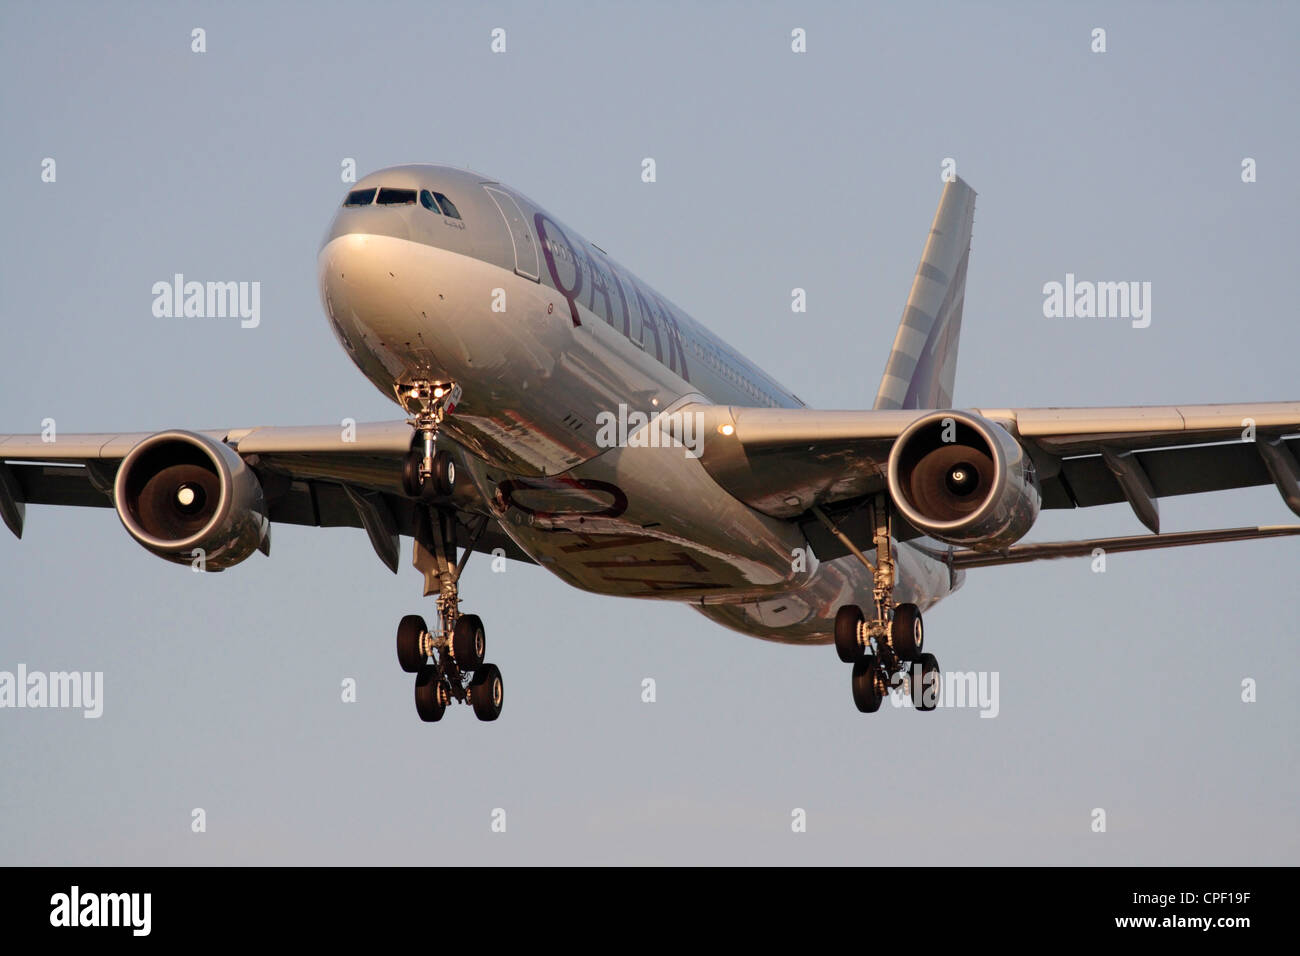 Qatar Airways Airbus A330-200 widebody airliner on arrival at sunset. Head on view. Stock Photo